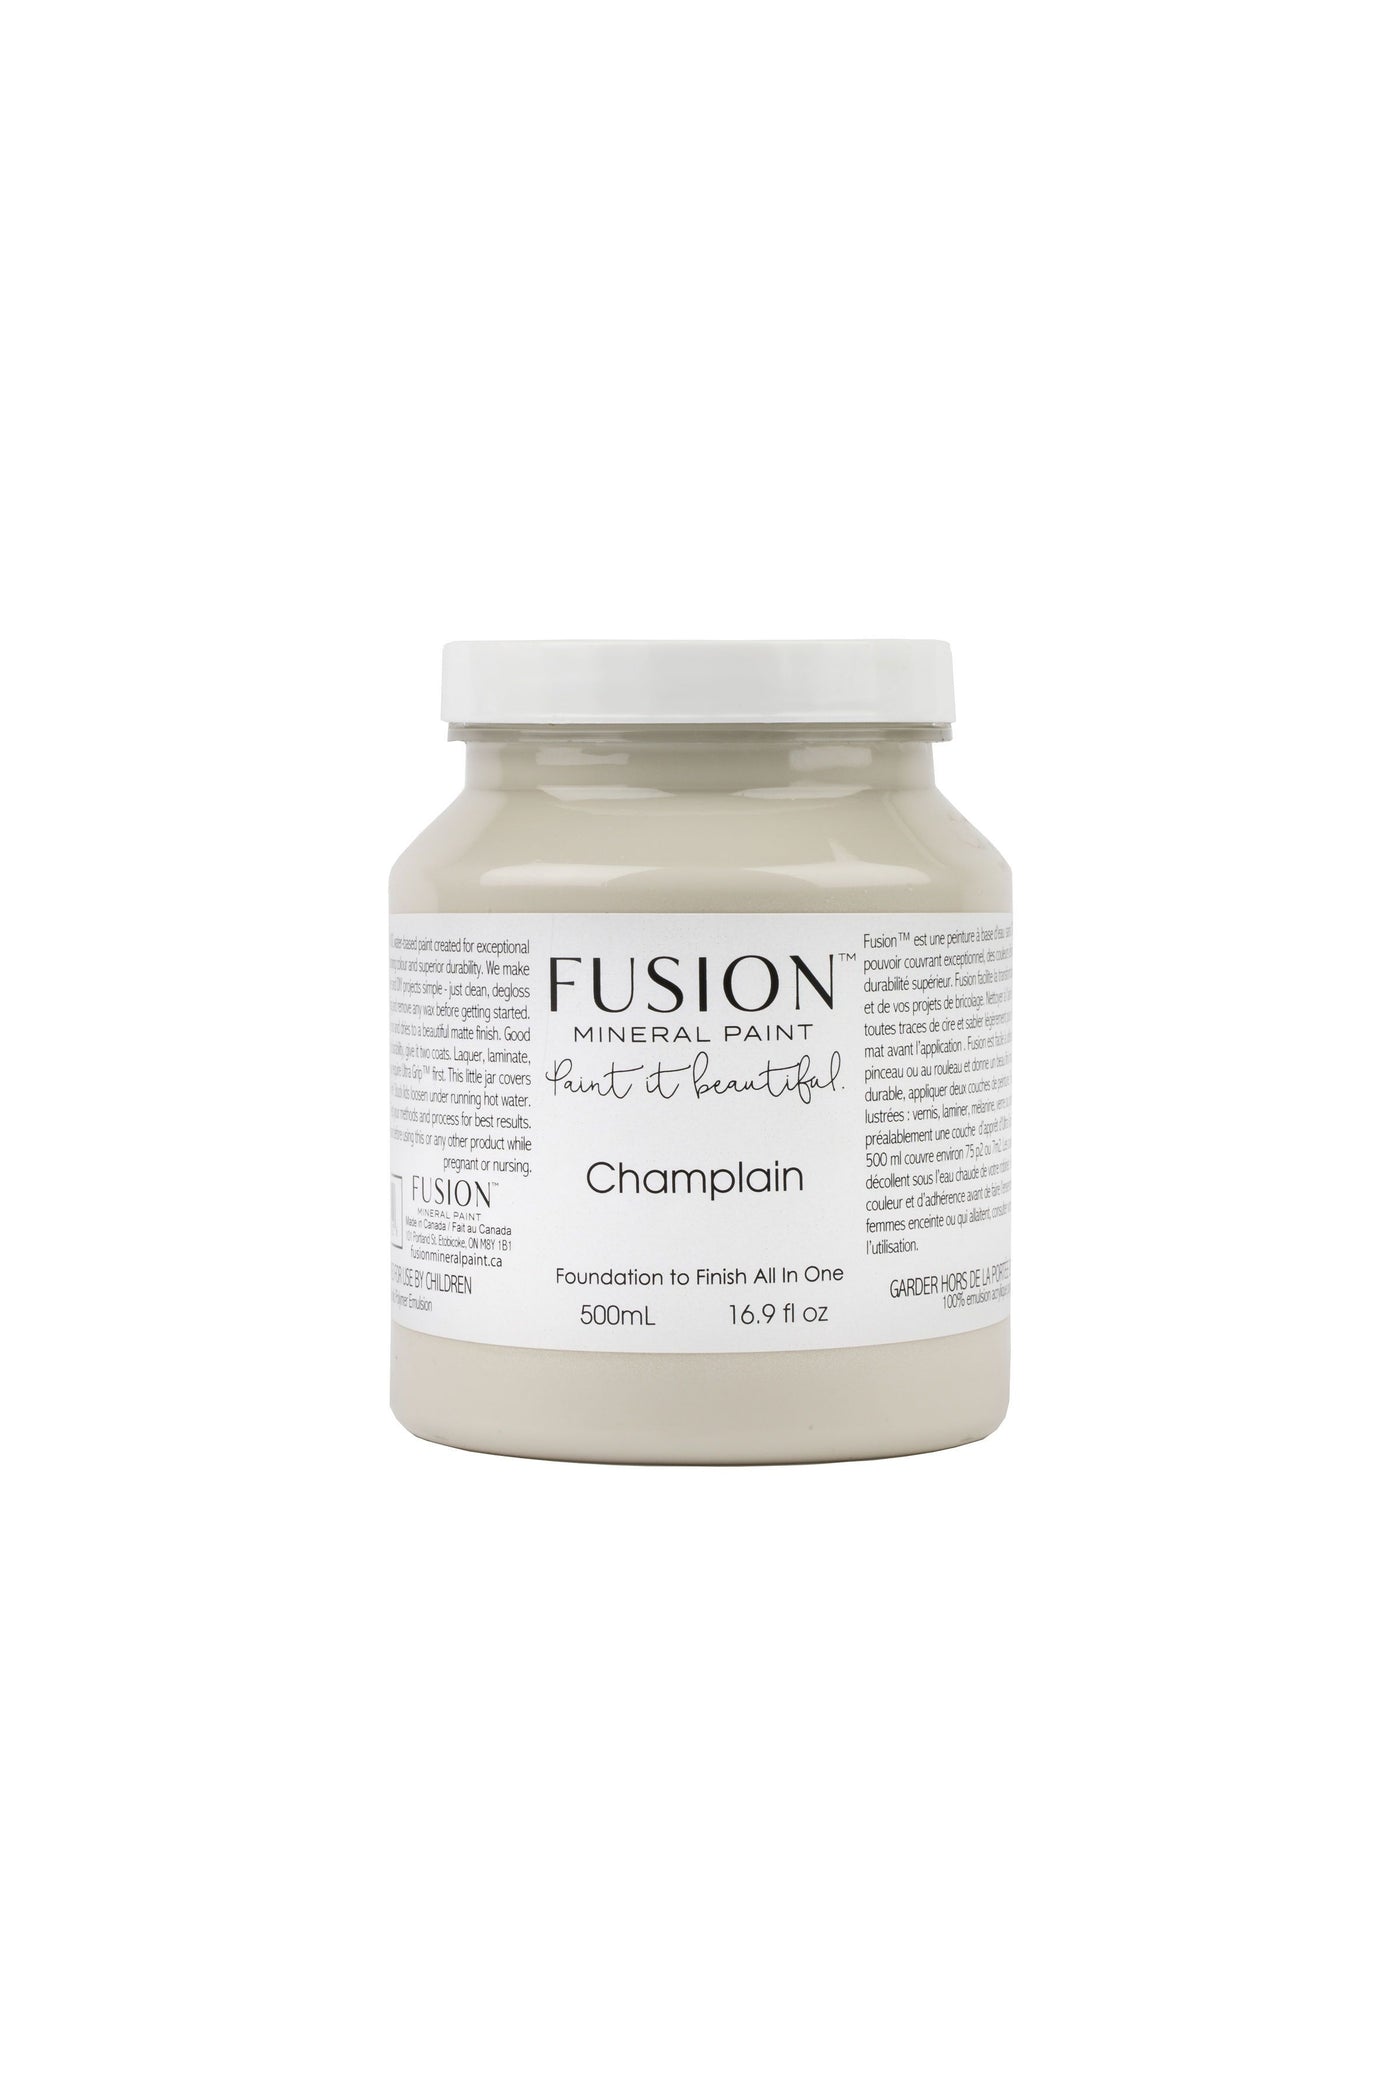 Fusion Mineral Paint Champlain 500ml near white neutral For the Love Creations